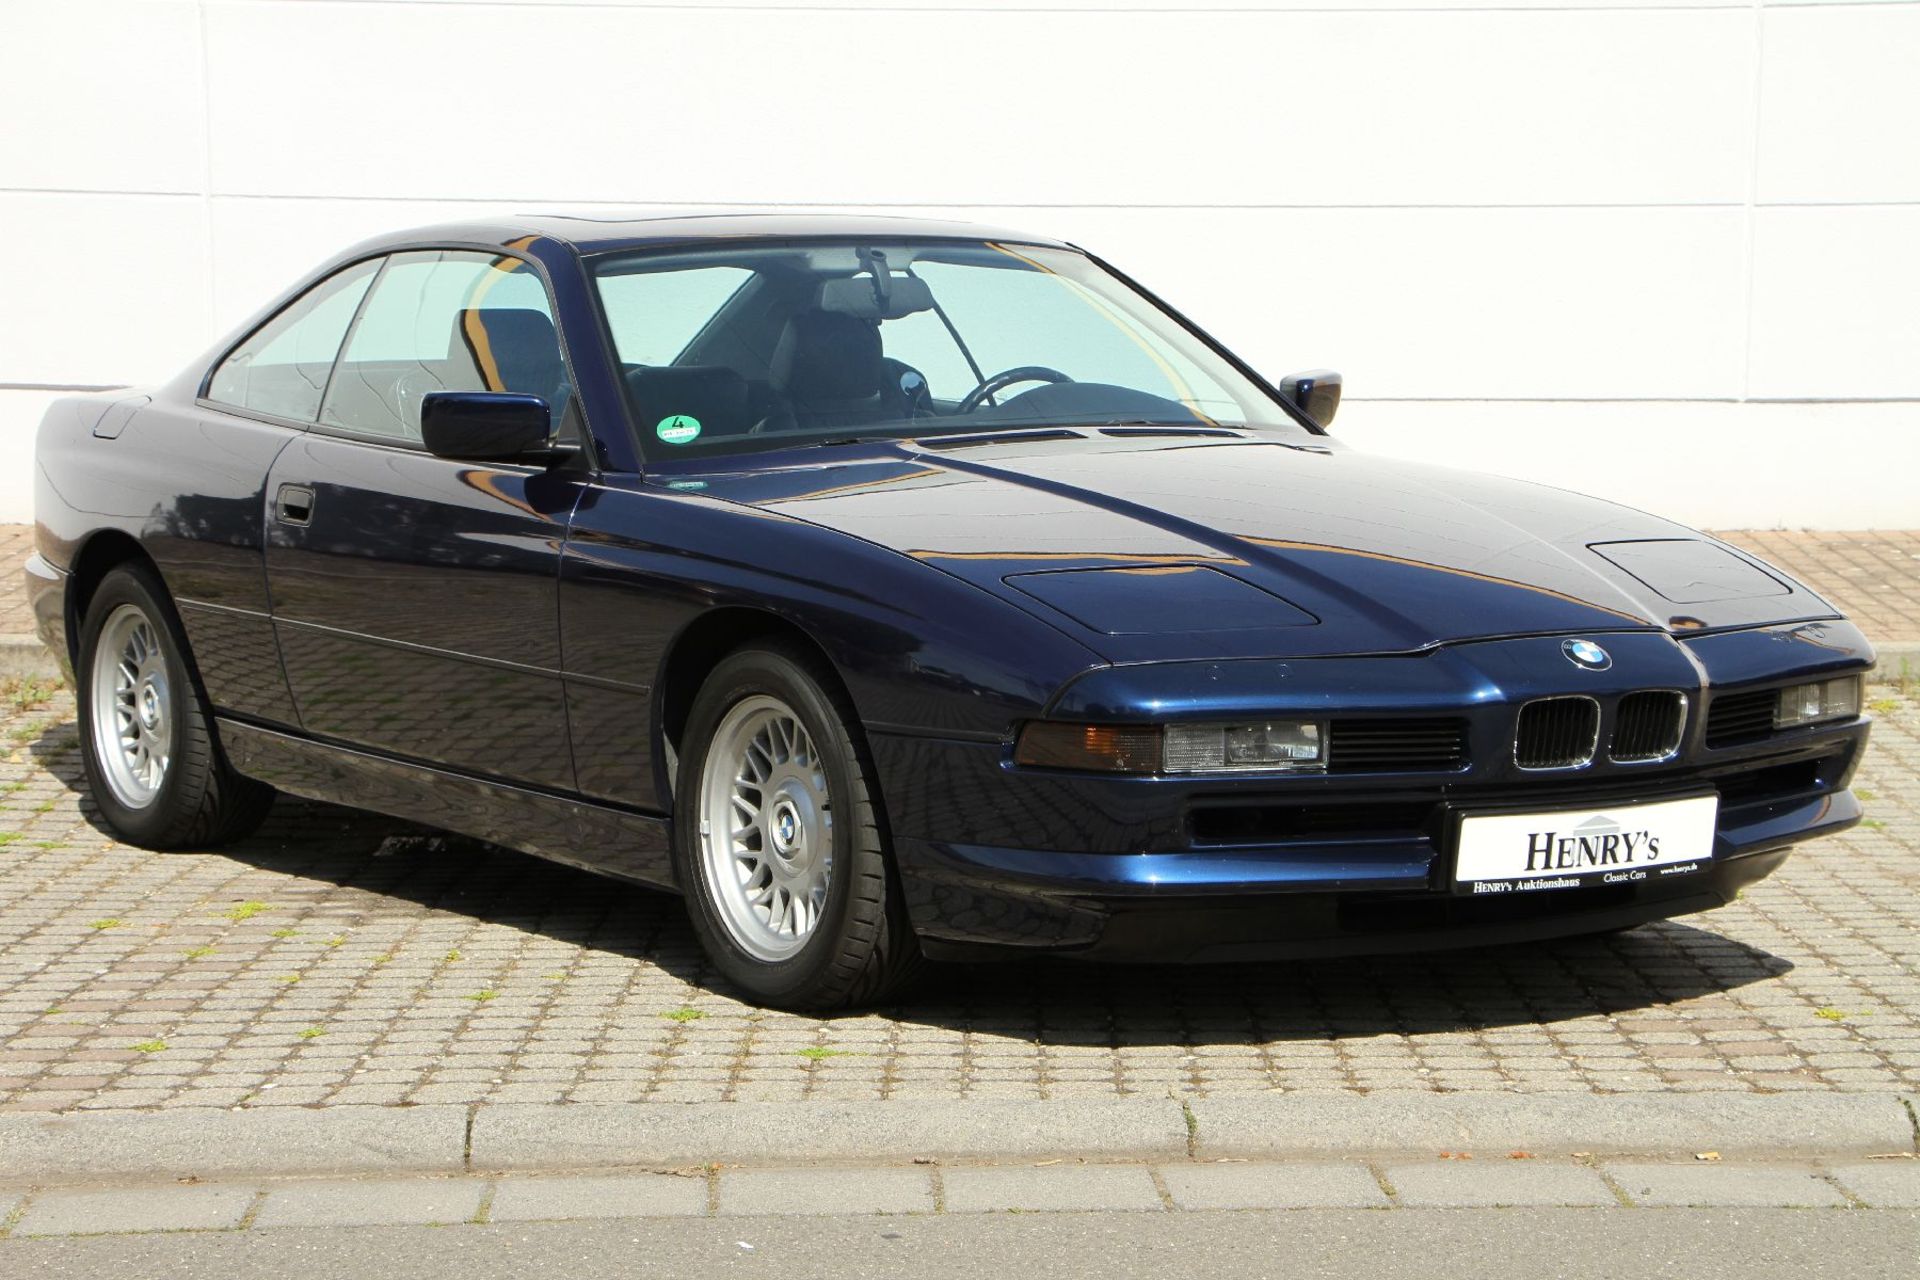 BMW 850i E31, Chassis Number: WBAEG11080CB14543, first registered 11/1992, german car with one